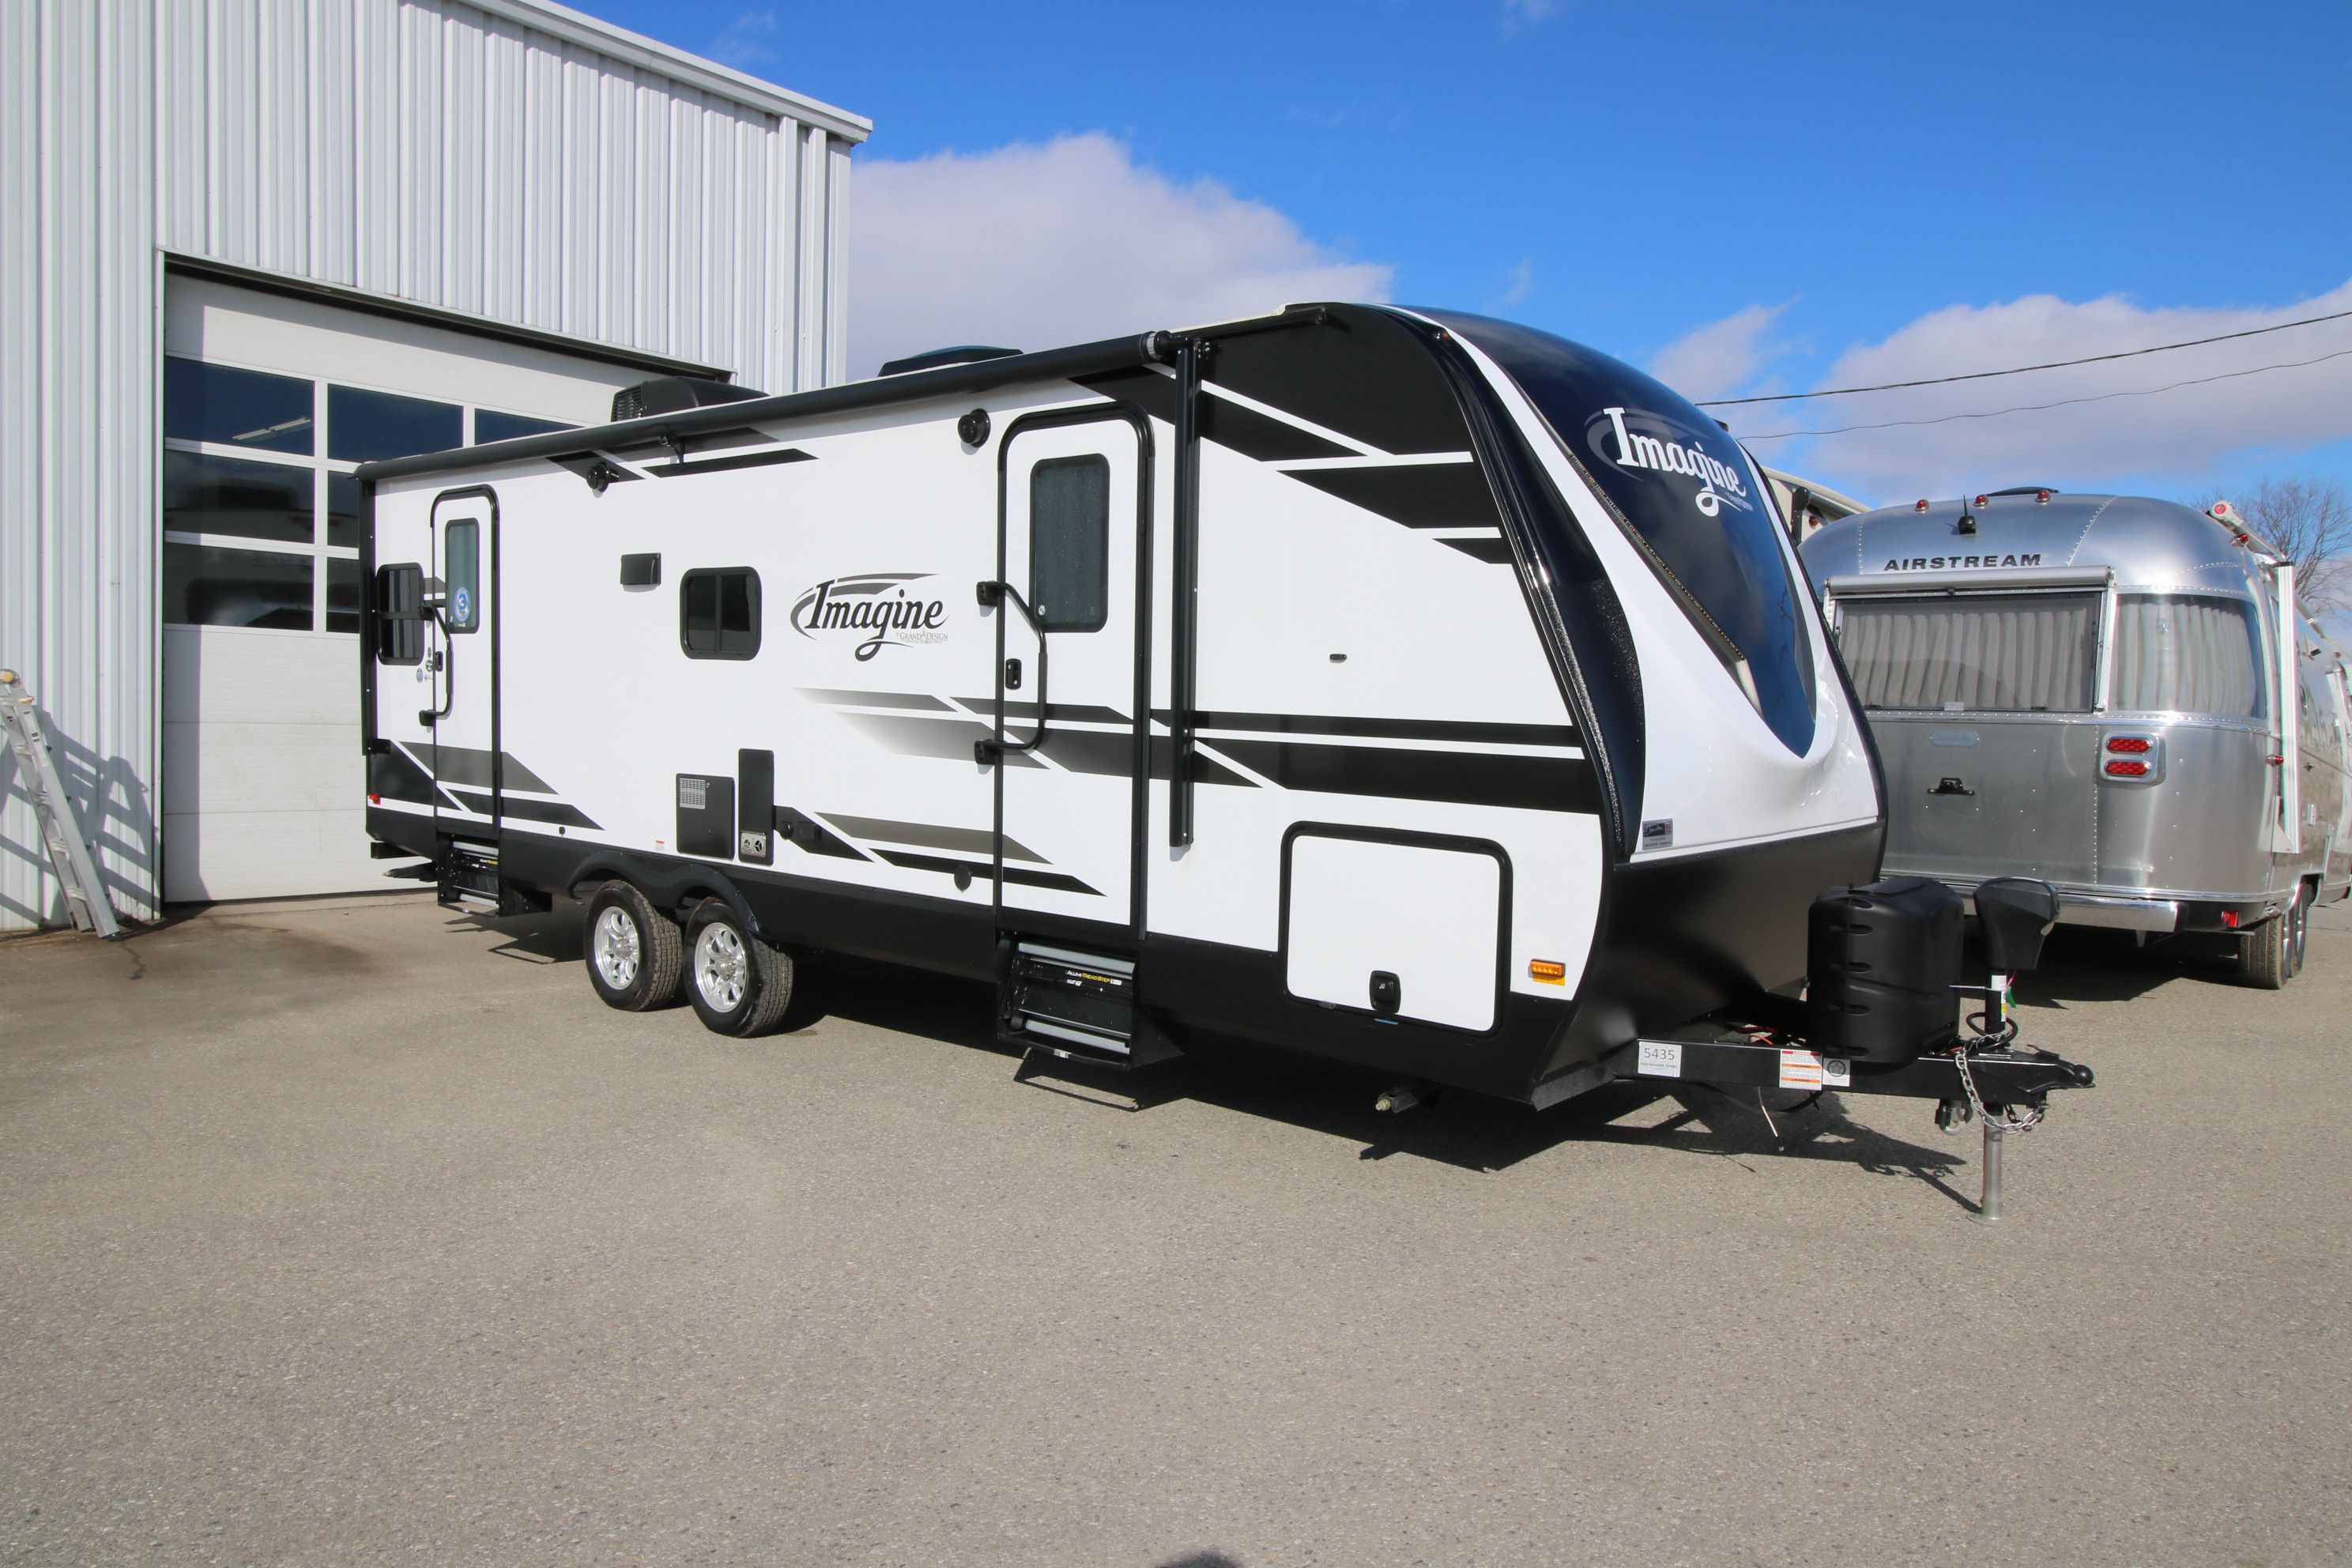 25' travel trailers